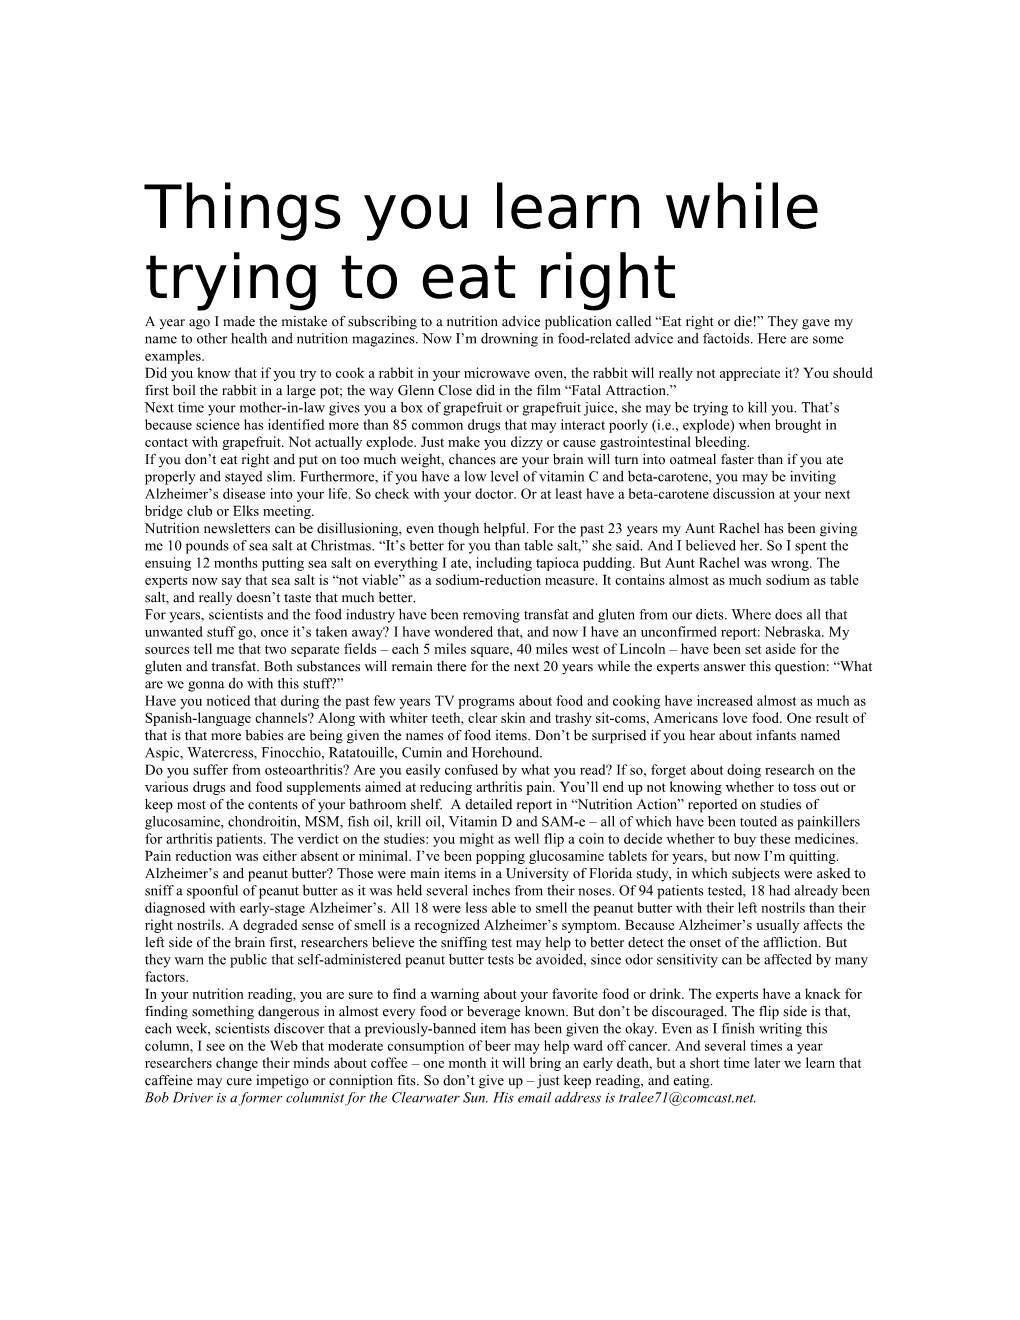 Things You Learn While Trying to Eat Right